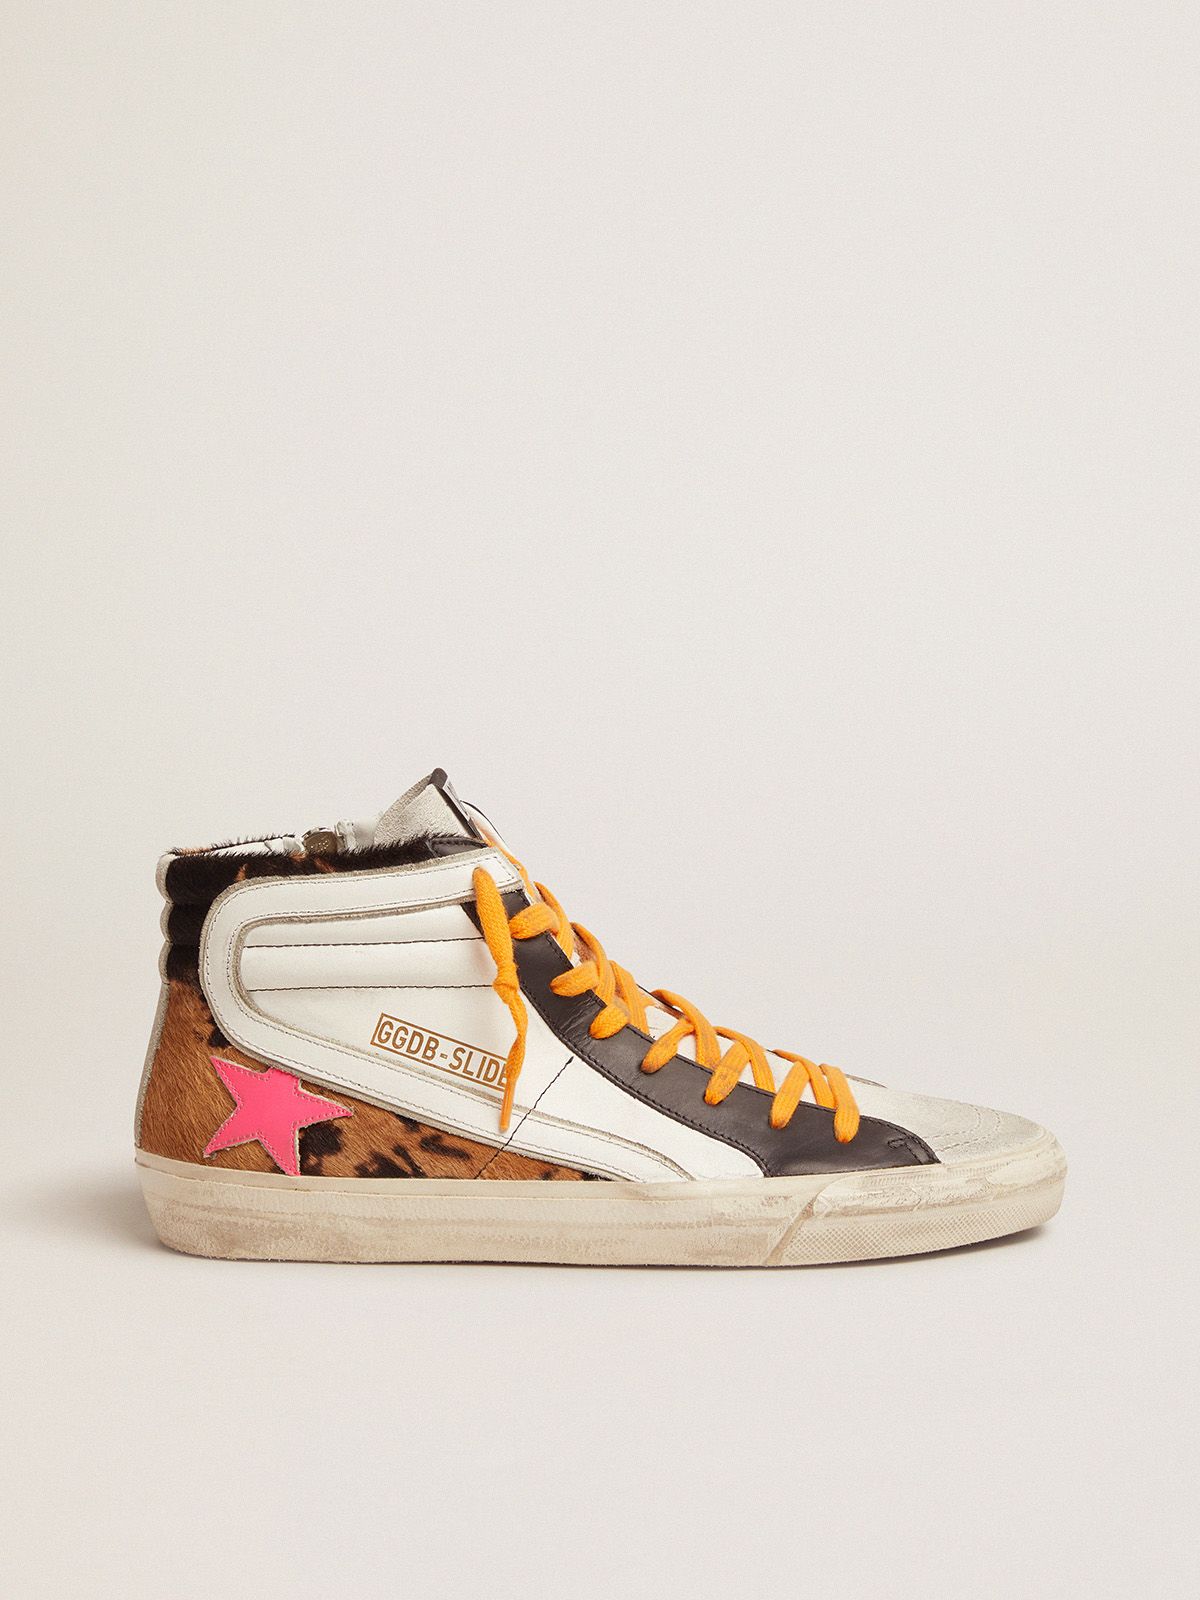 golden goose with and a Slide orange pony sneakers laces skin, star leather in suede fuchsia